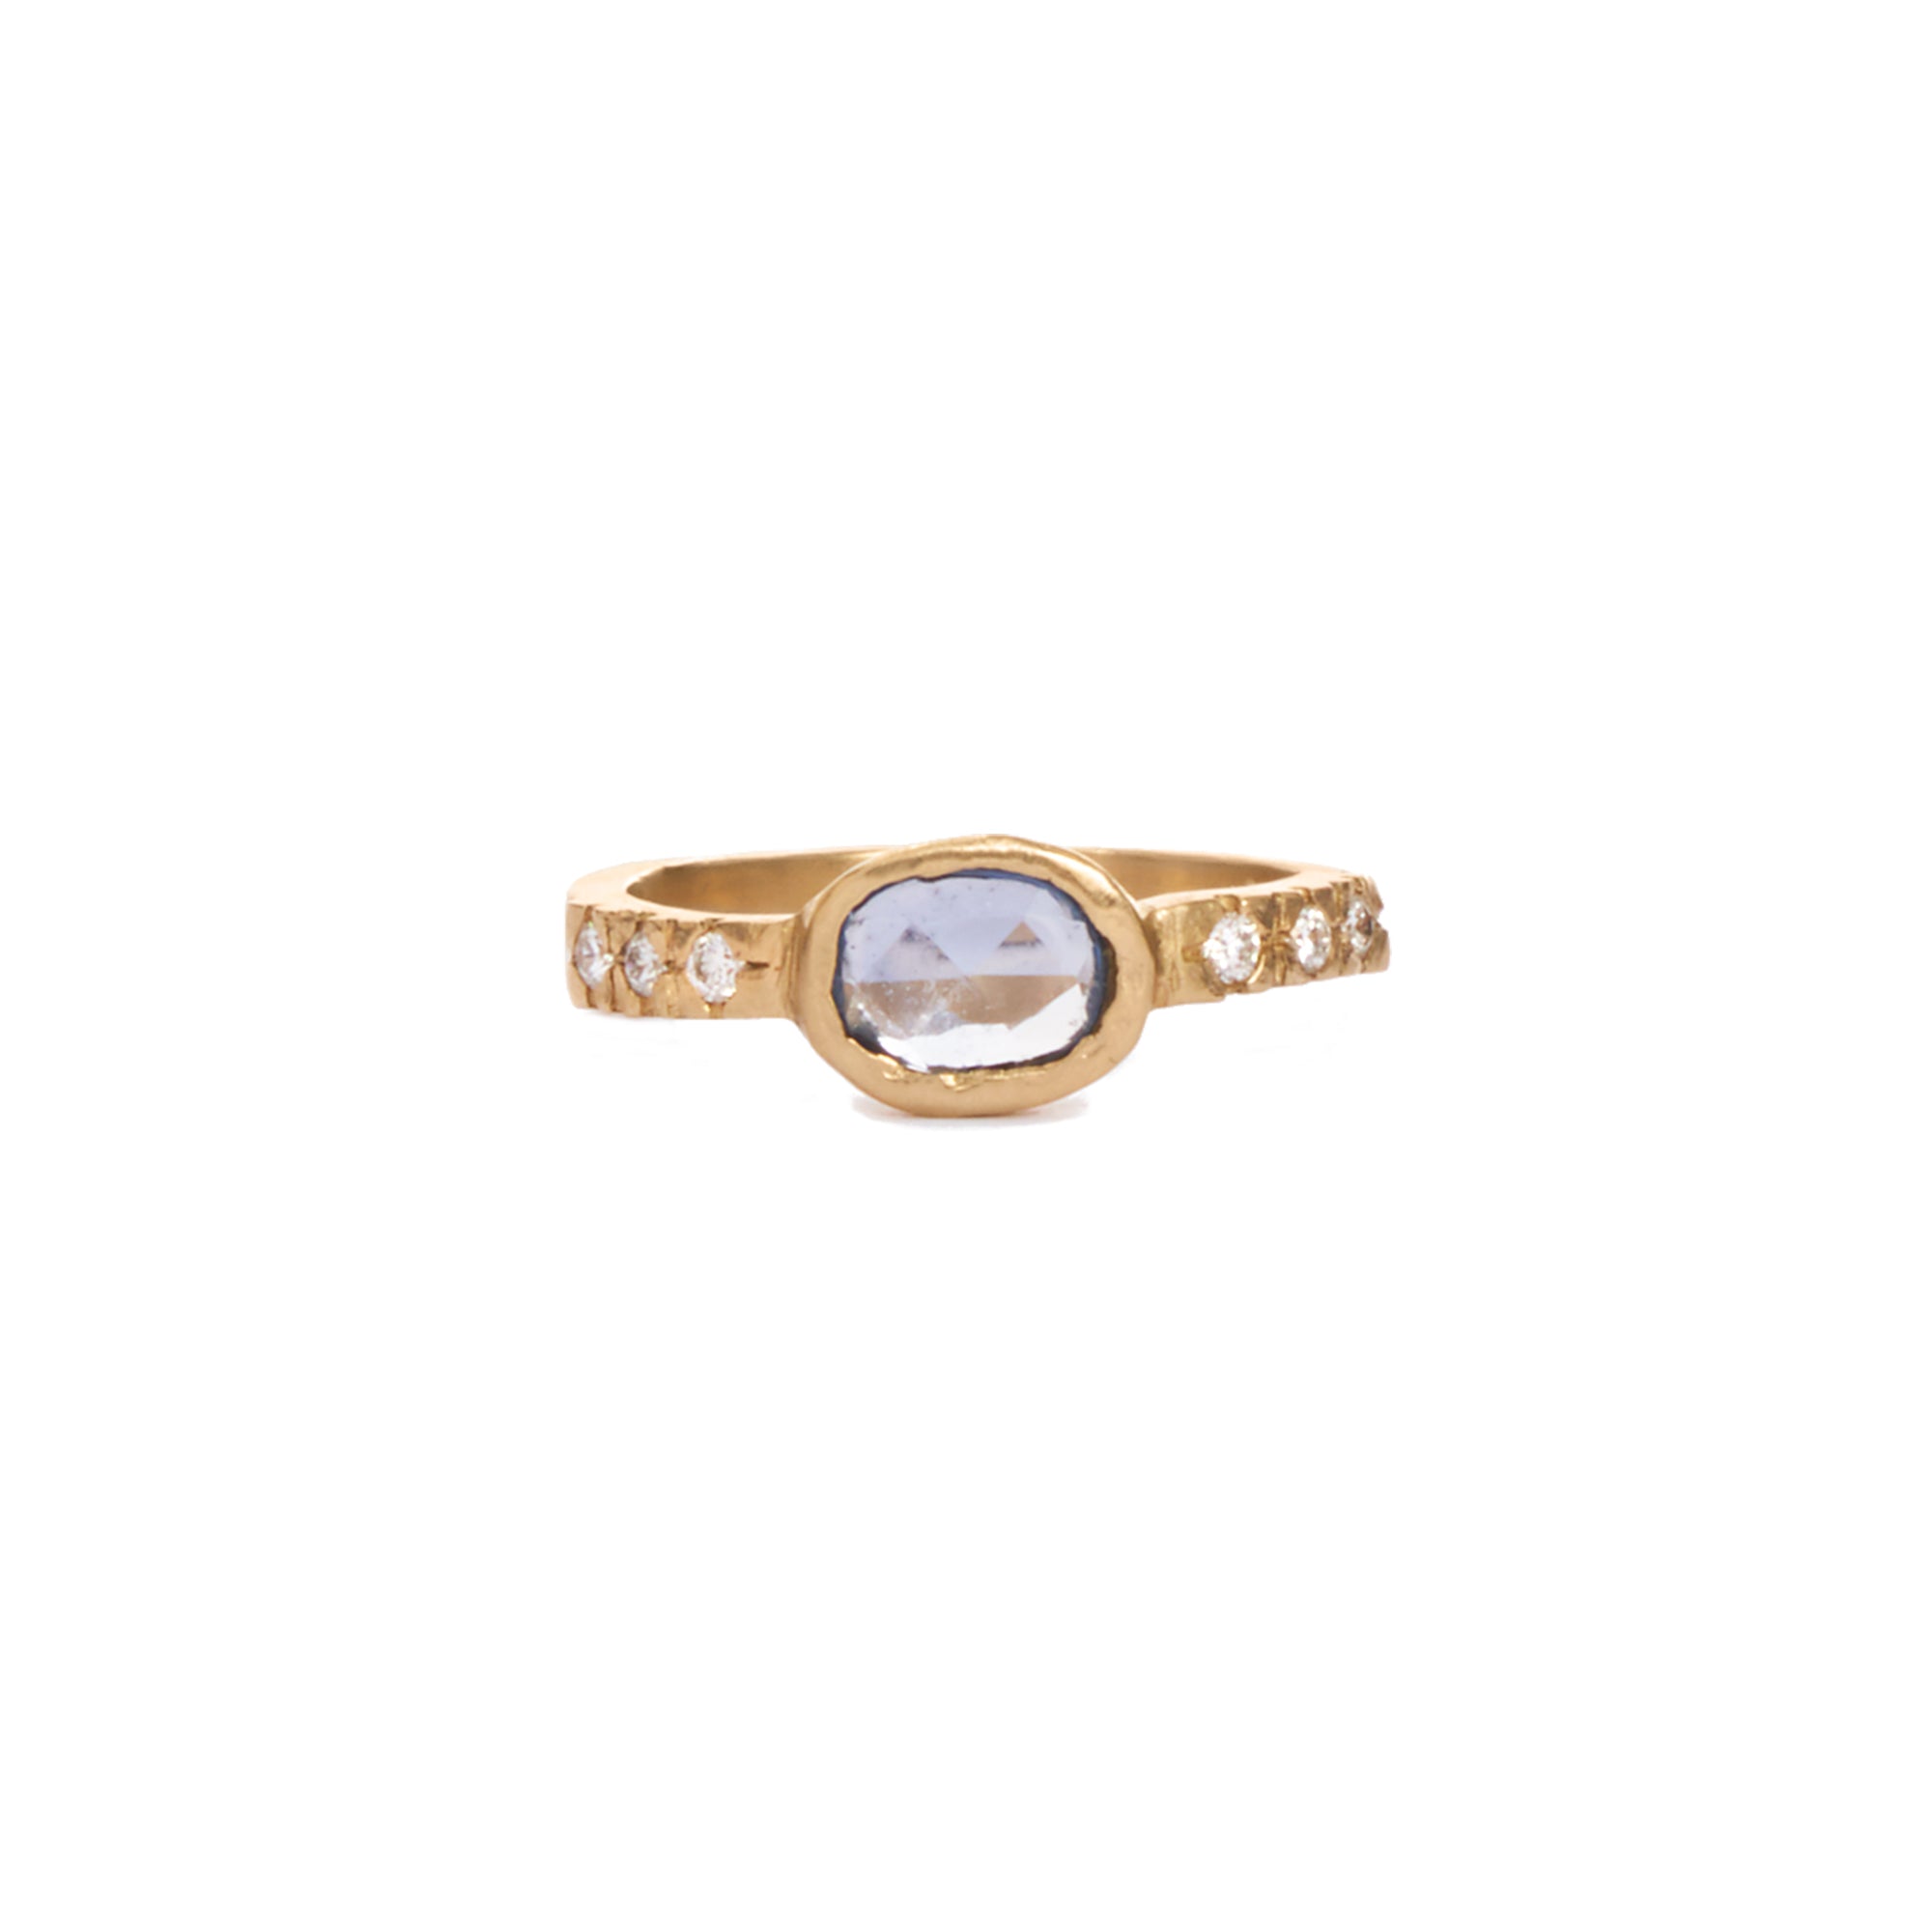 This one of a kind ring features a bezel set oval blue sapphire and six round diamonds, all set in 14k gold. 